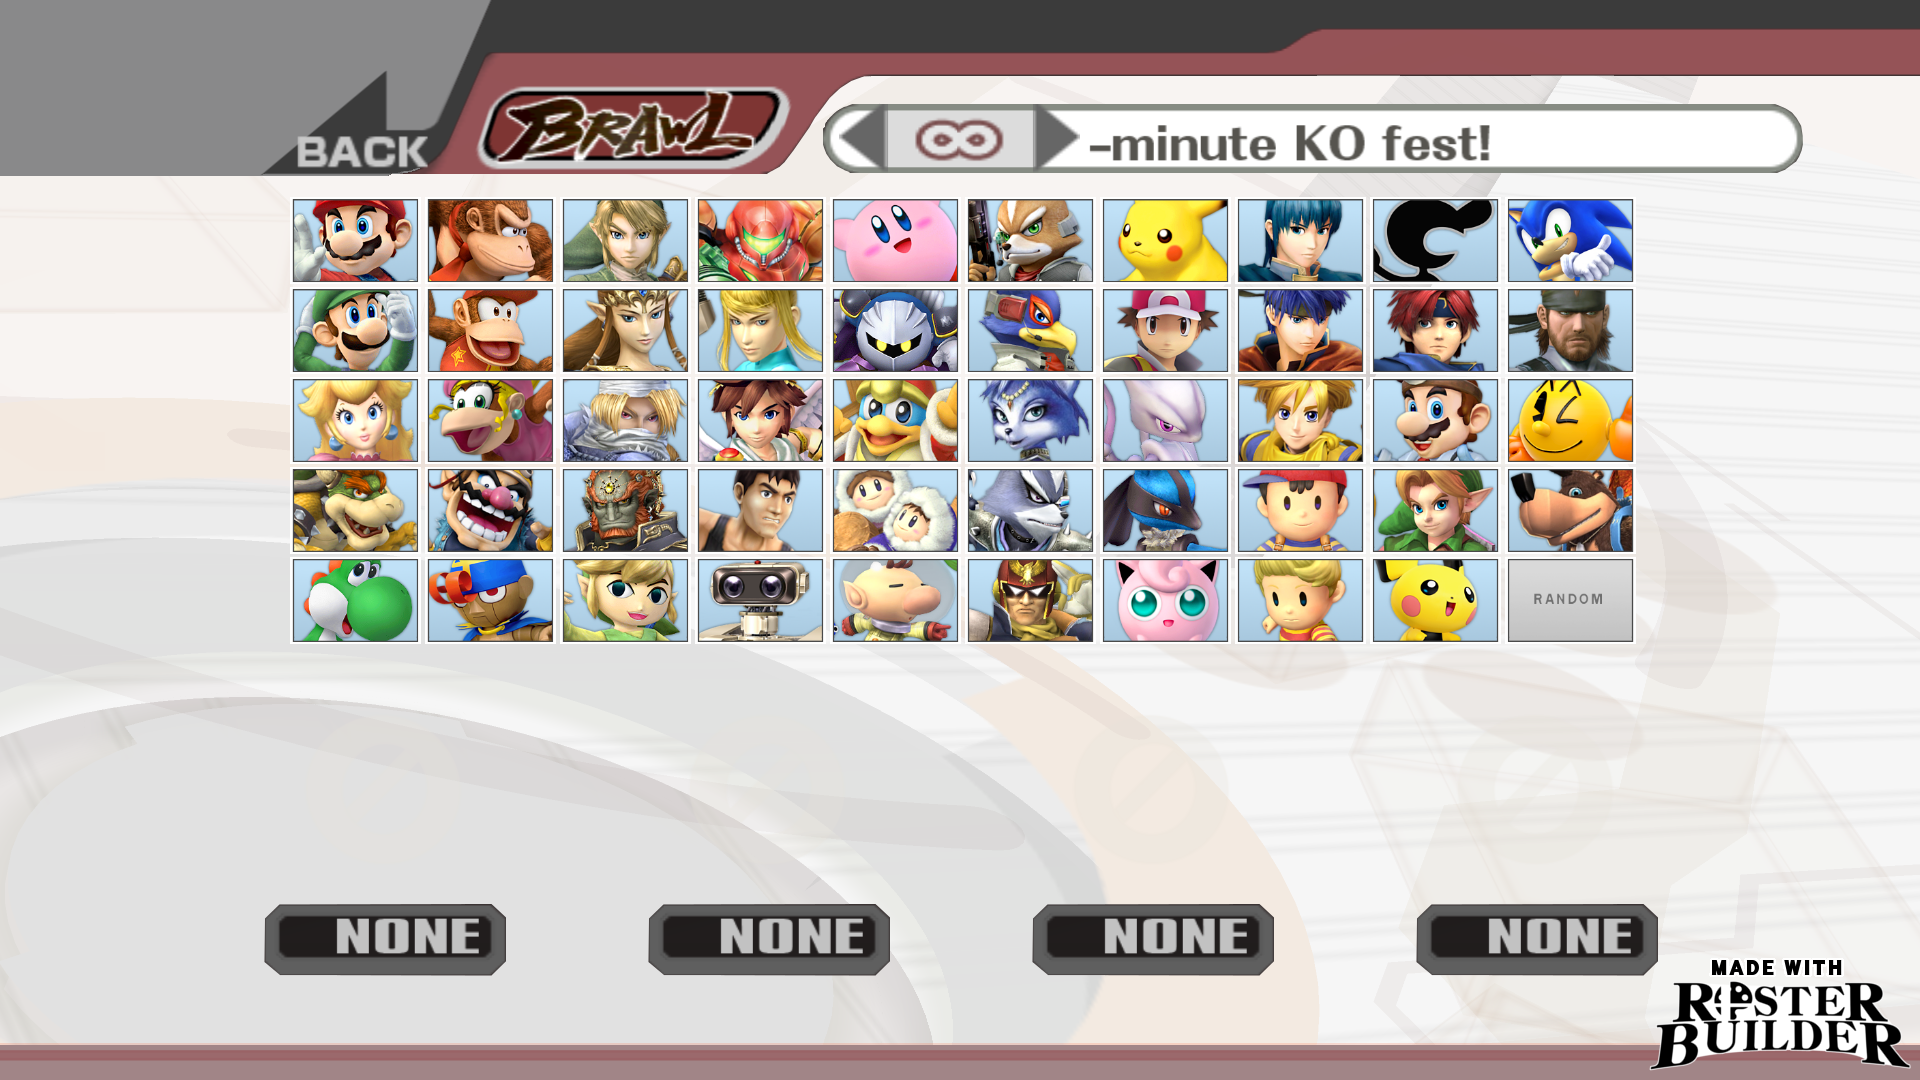 In a similar vein to what people have done with Smash Bros' roster, what if  the cast 3.0 additions was cut by half? : r/FridayNightFunkin